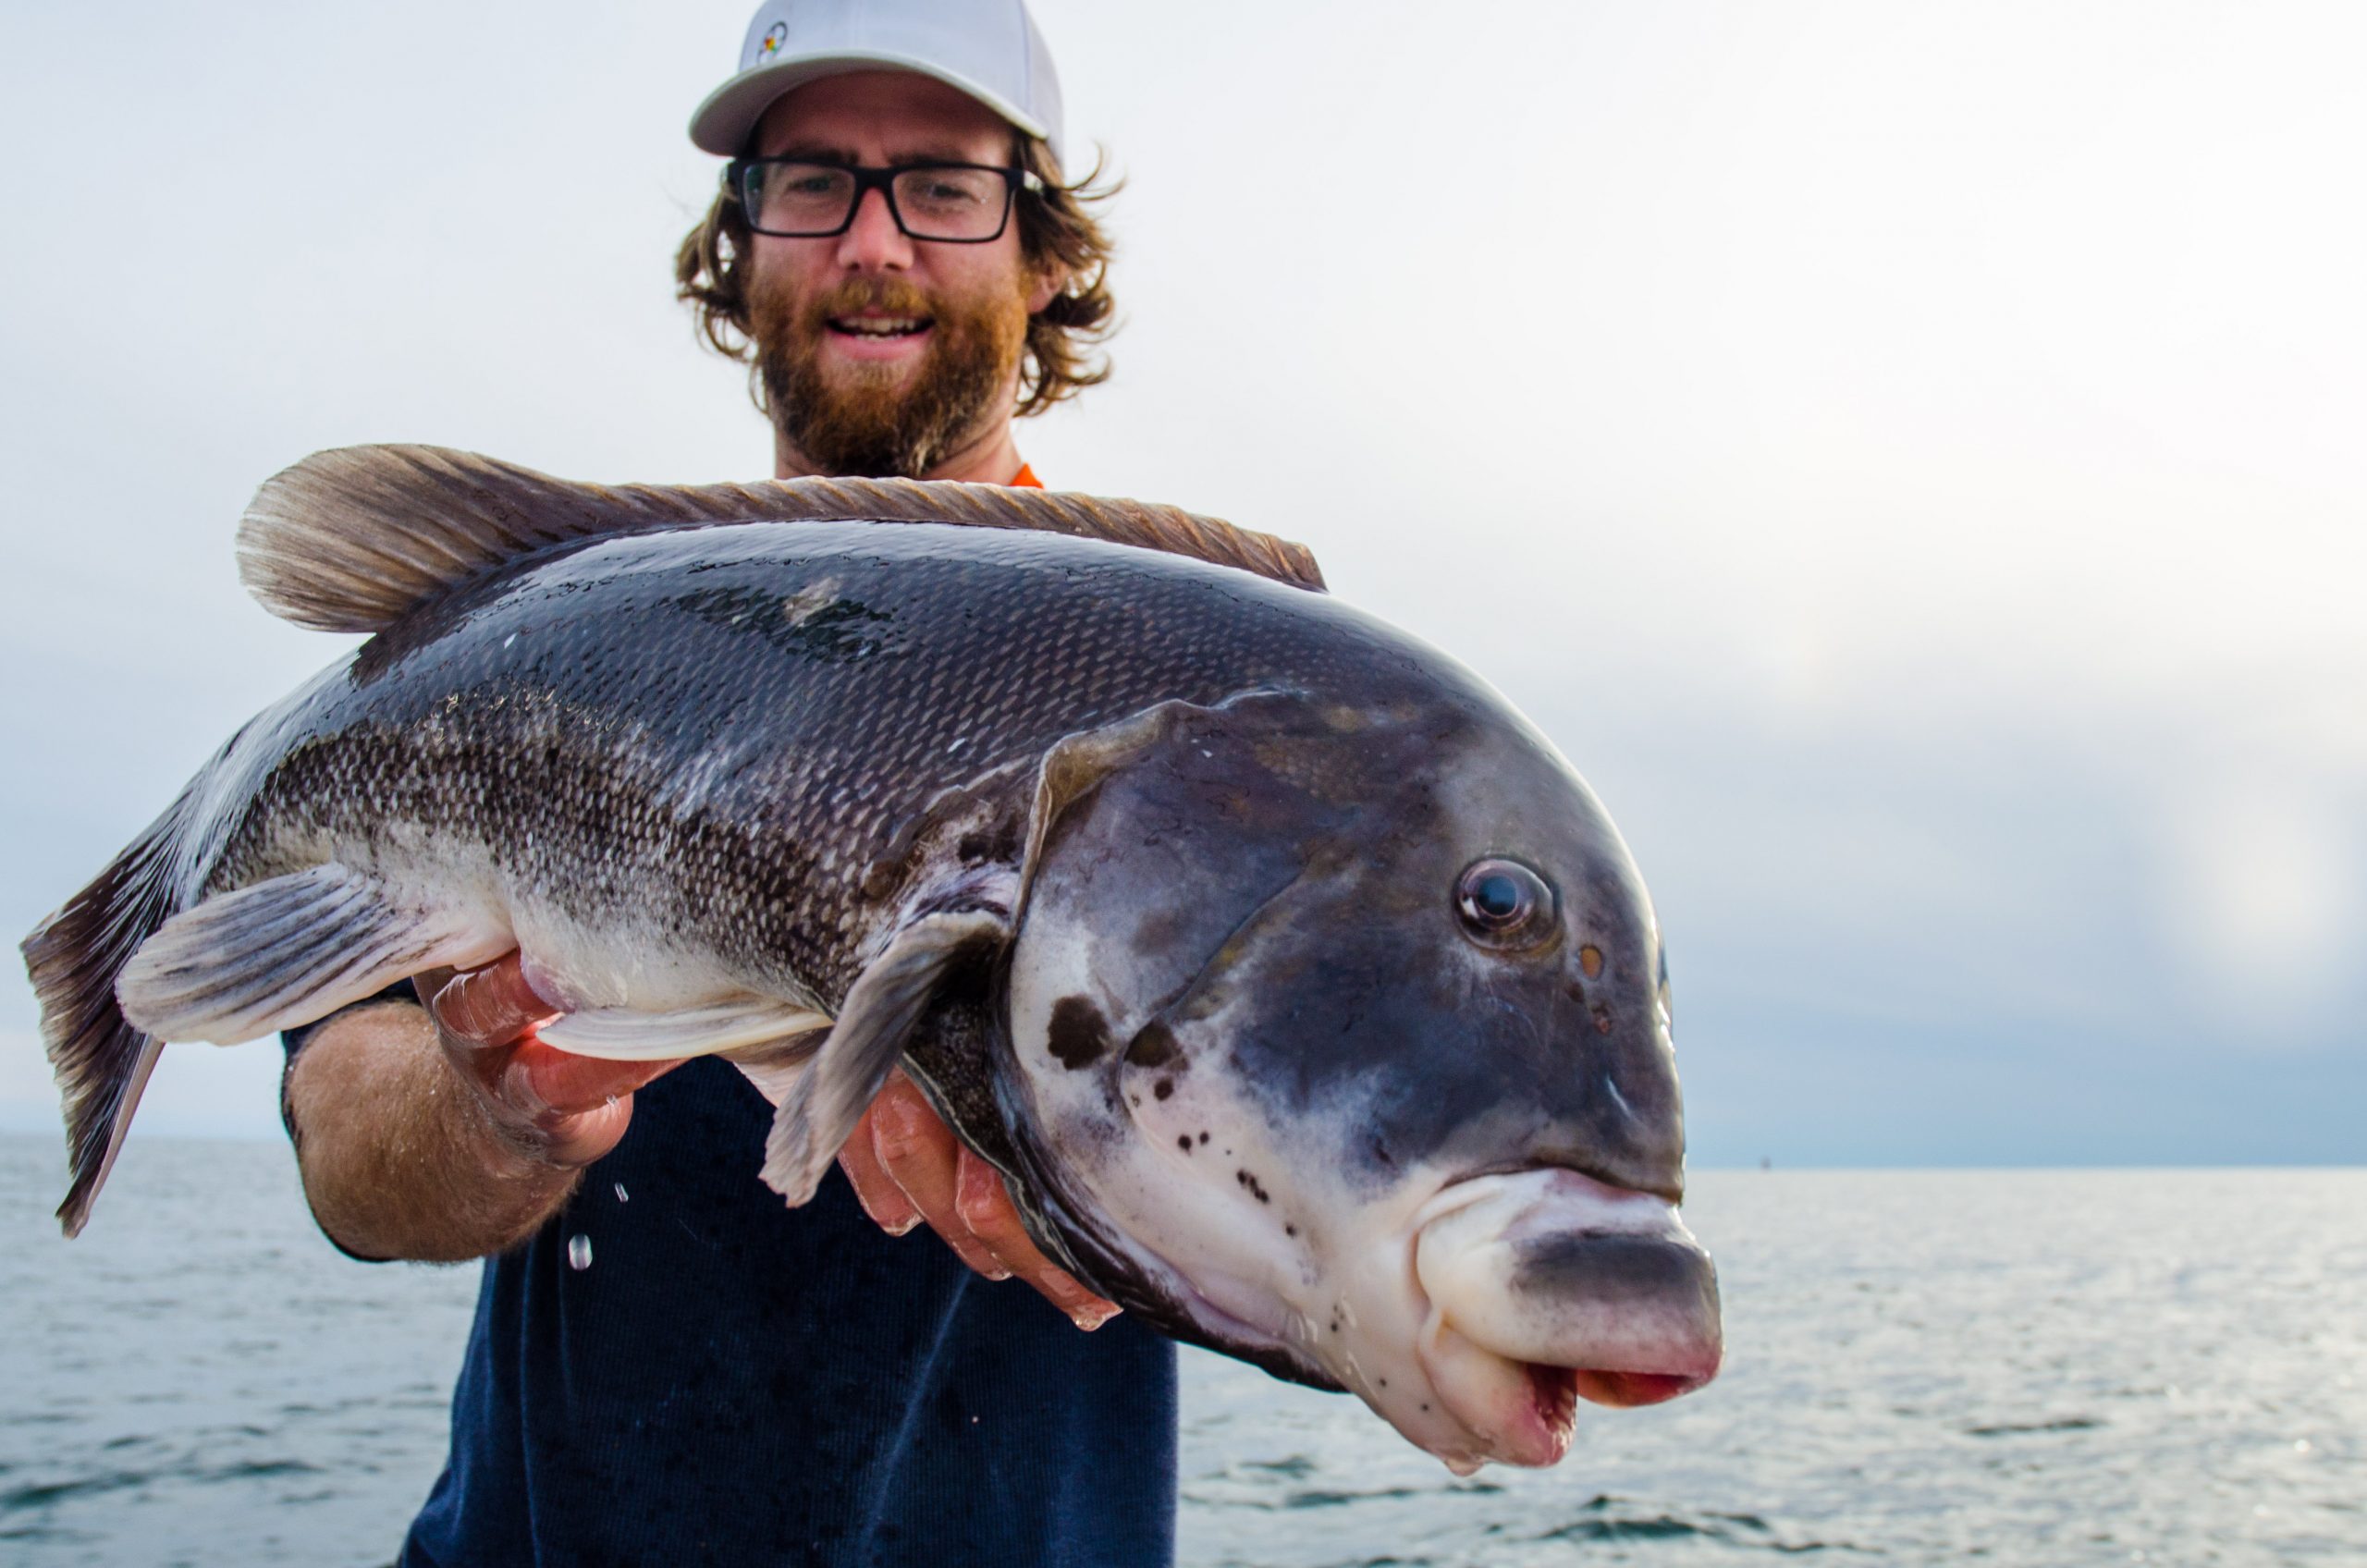 Tautog Fishing Tips from the Pros - On The Water